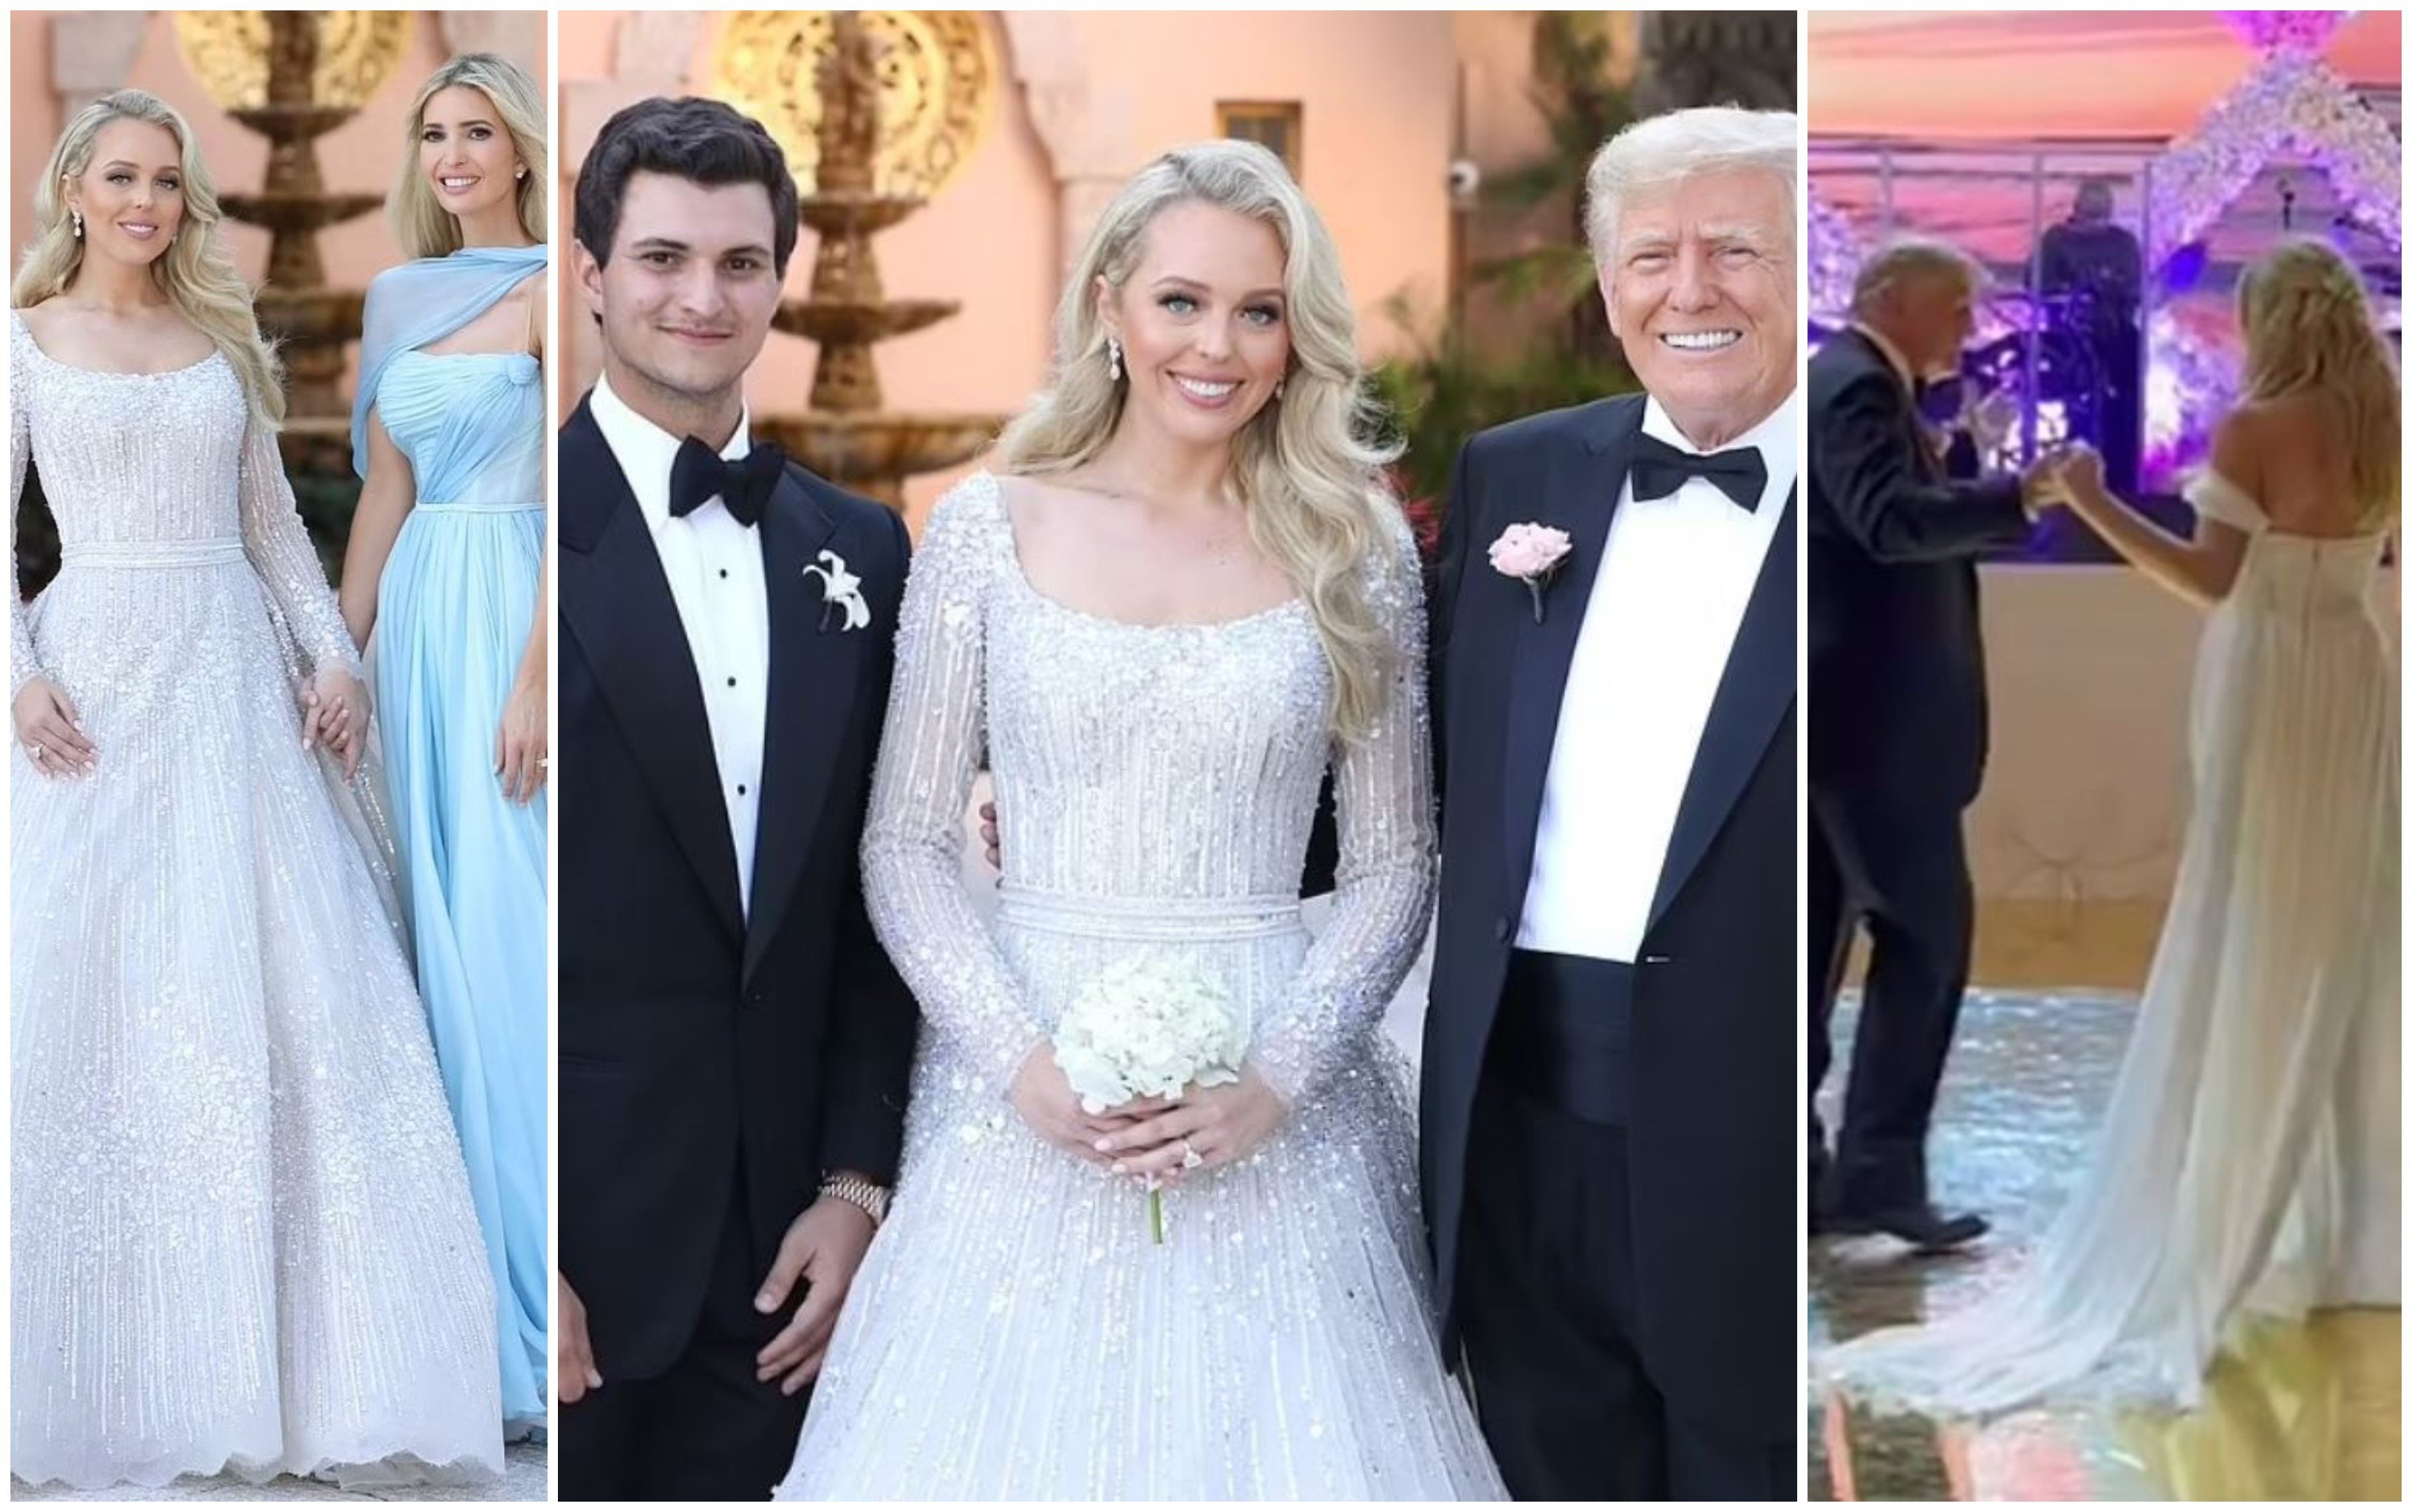 Tiffany Trump married Michael Boulos in Florida, with the rest of the Trump family in attendance. Photos:  @IvankaTrump/Twitter,  Denis Leon & Co, @karenshiboleth/Instagram